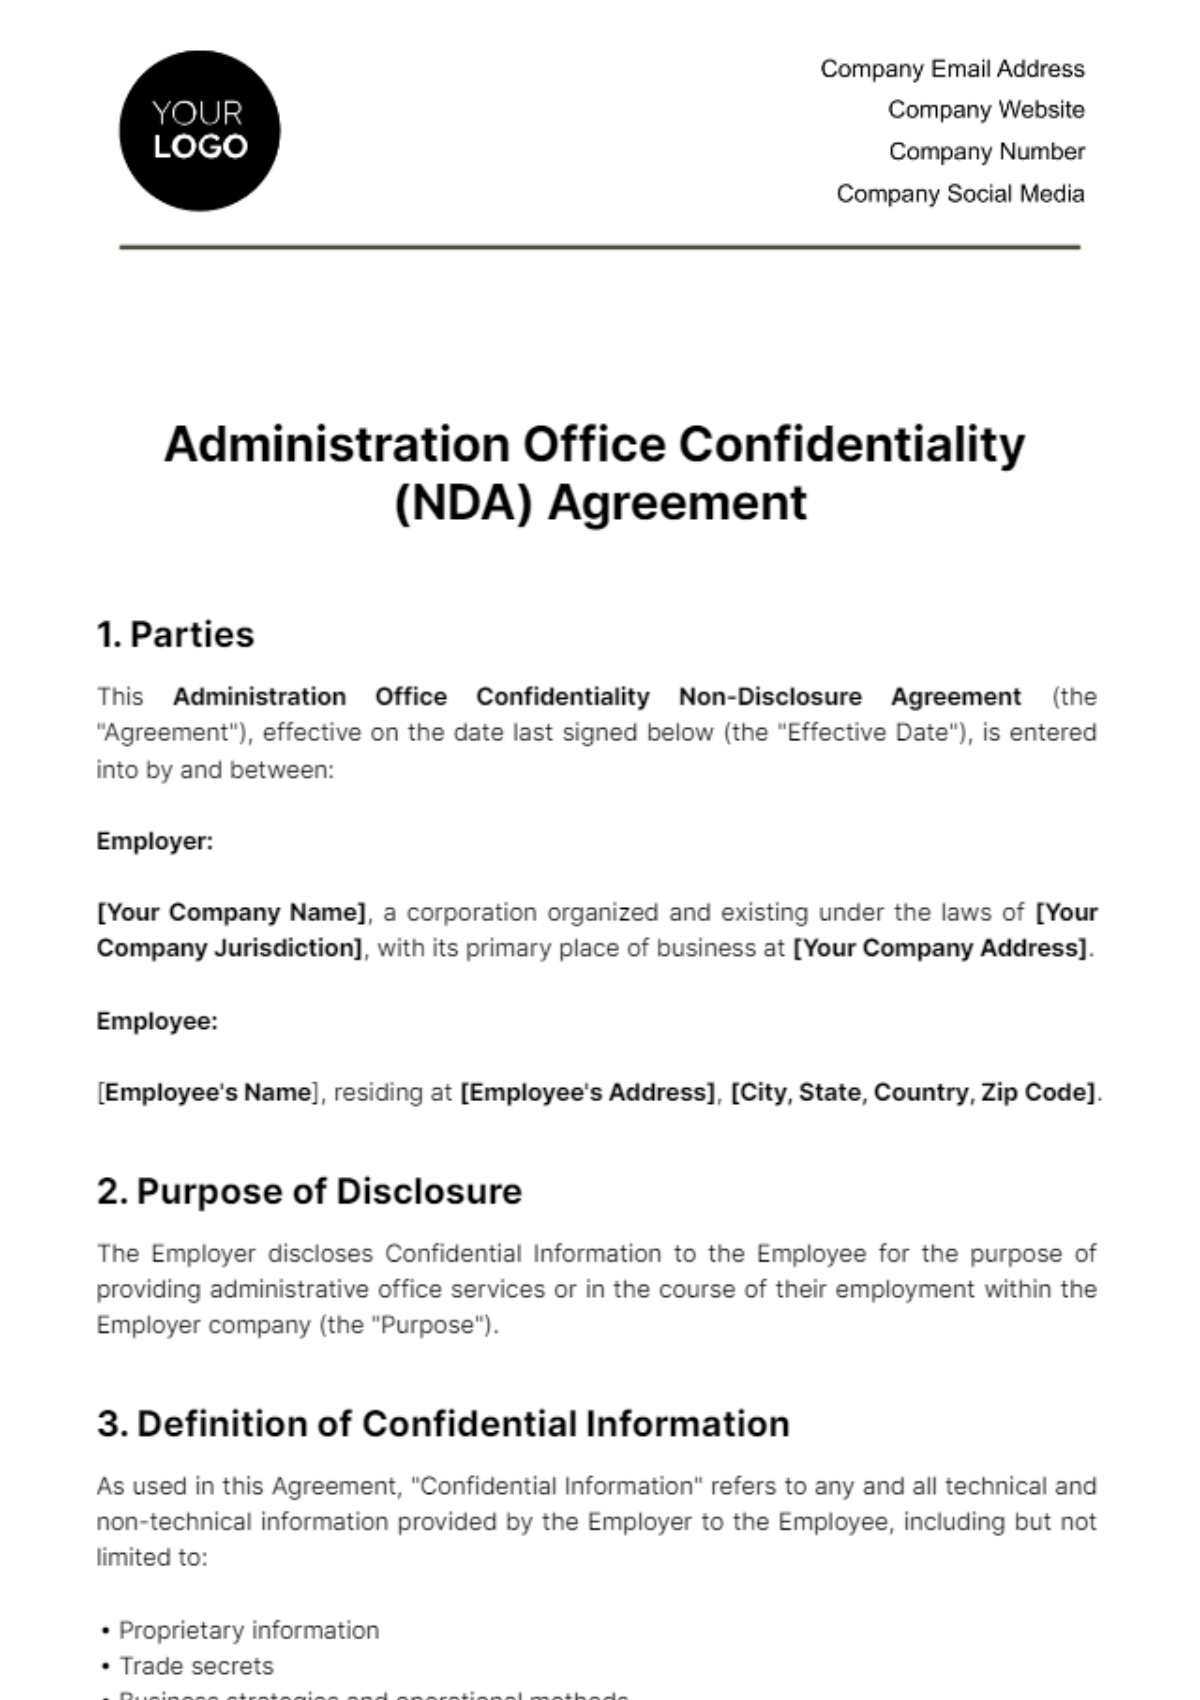 Administration Office Confidentiality (NDA) Agreement Template